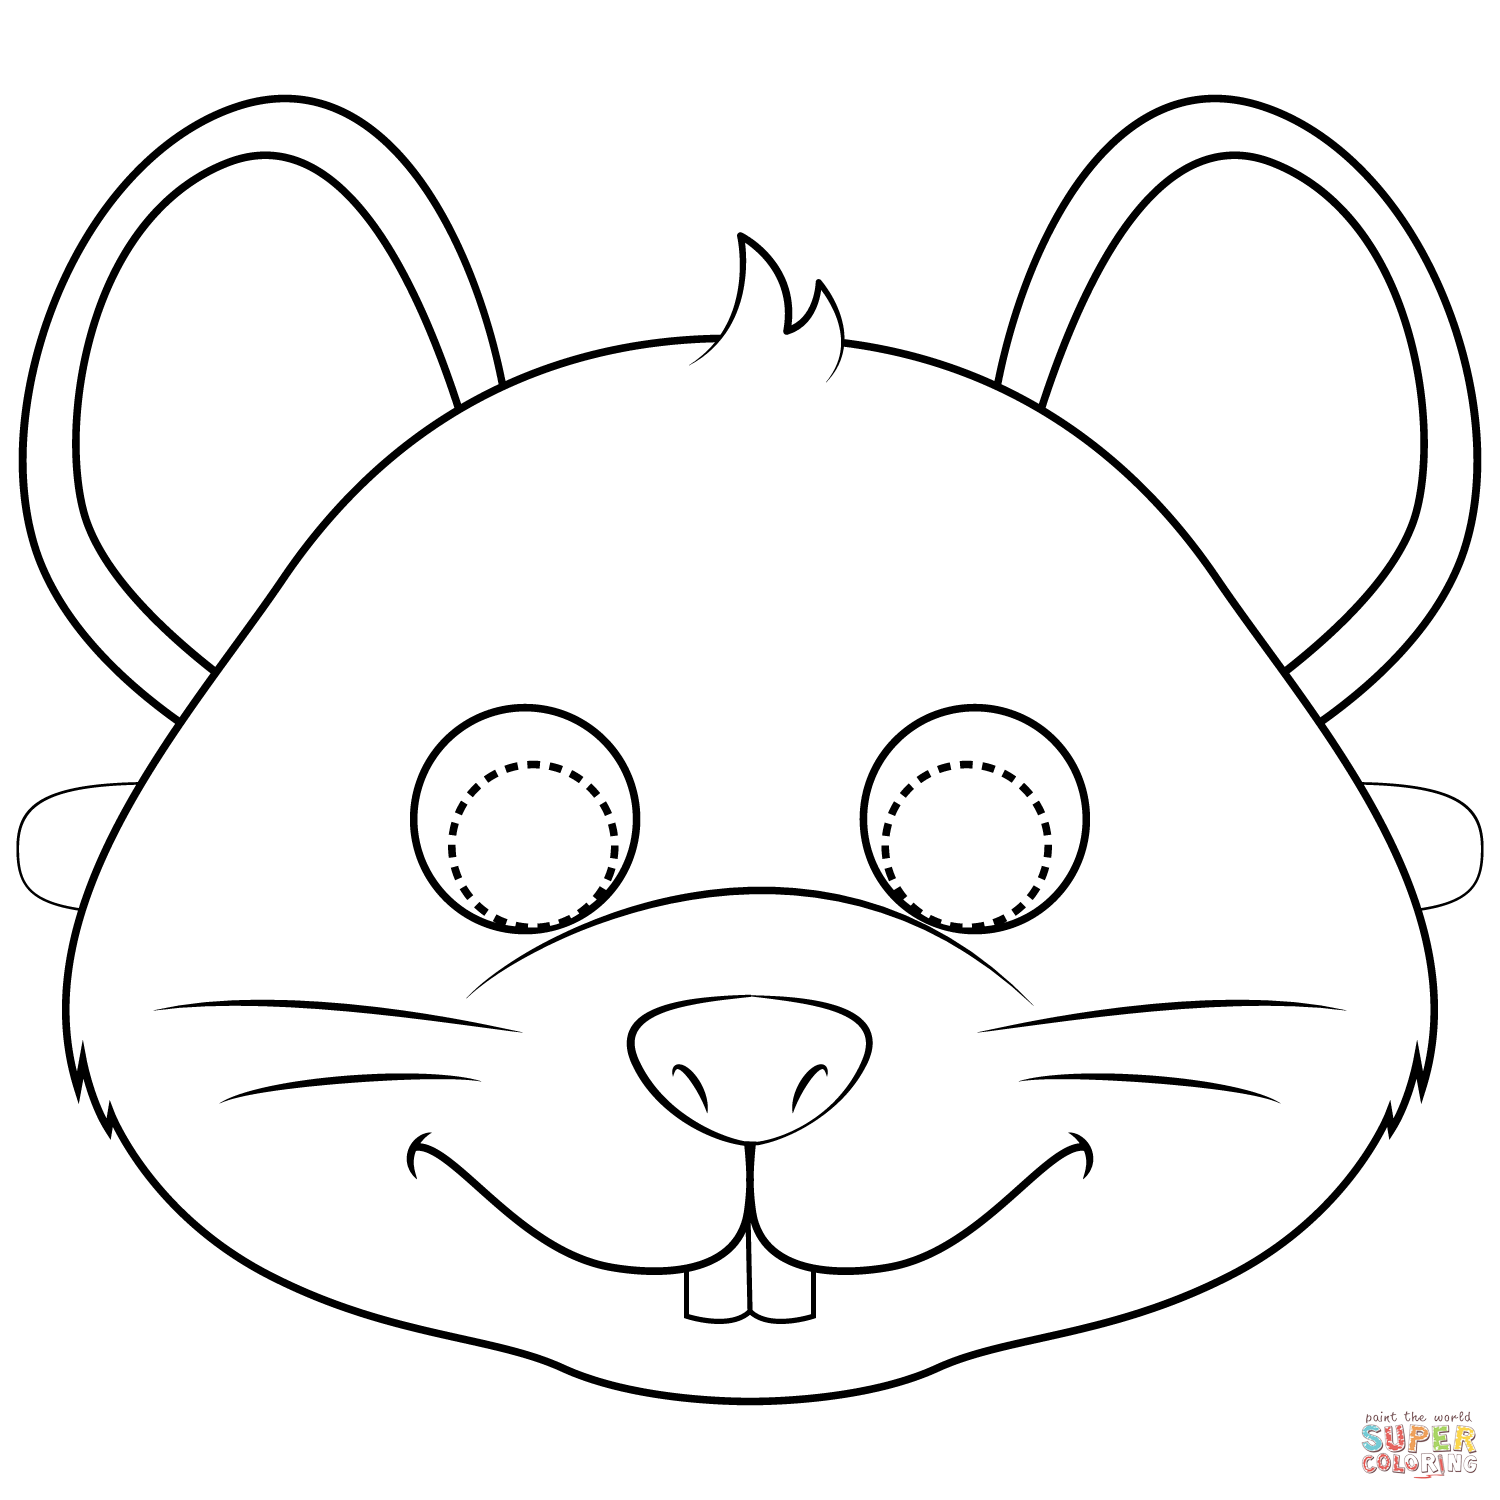 Mouse Mask coloring page | Free Printable Coloring Pages | Printable animal  masks, Mouse mask, Animal mask templates